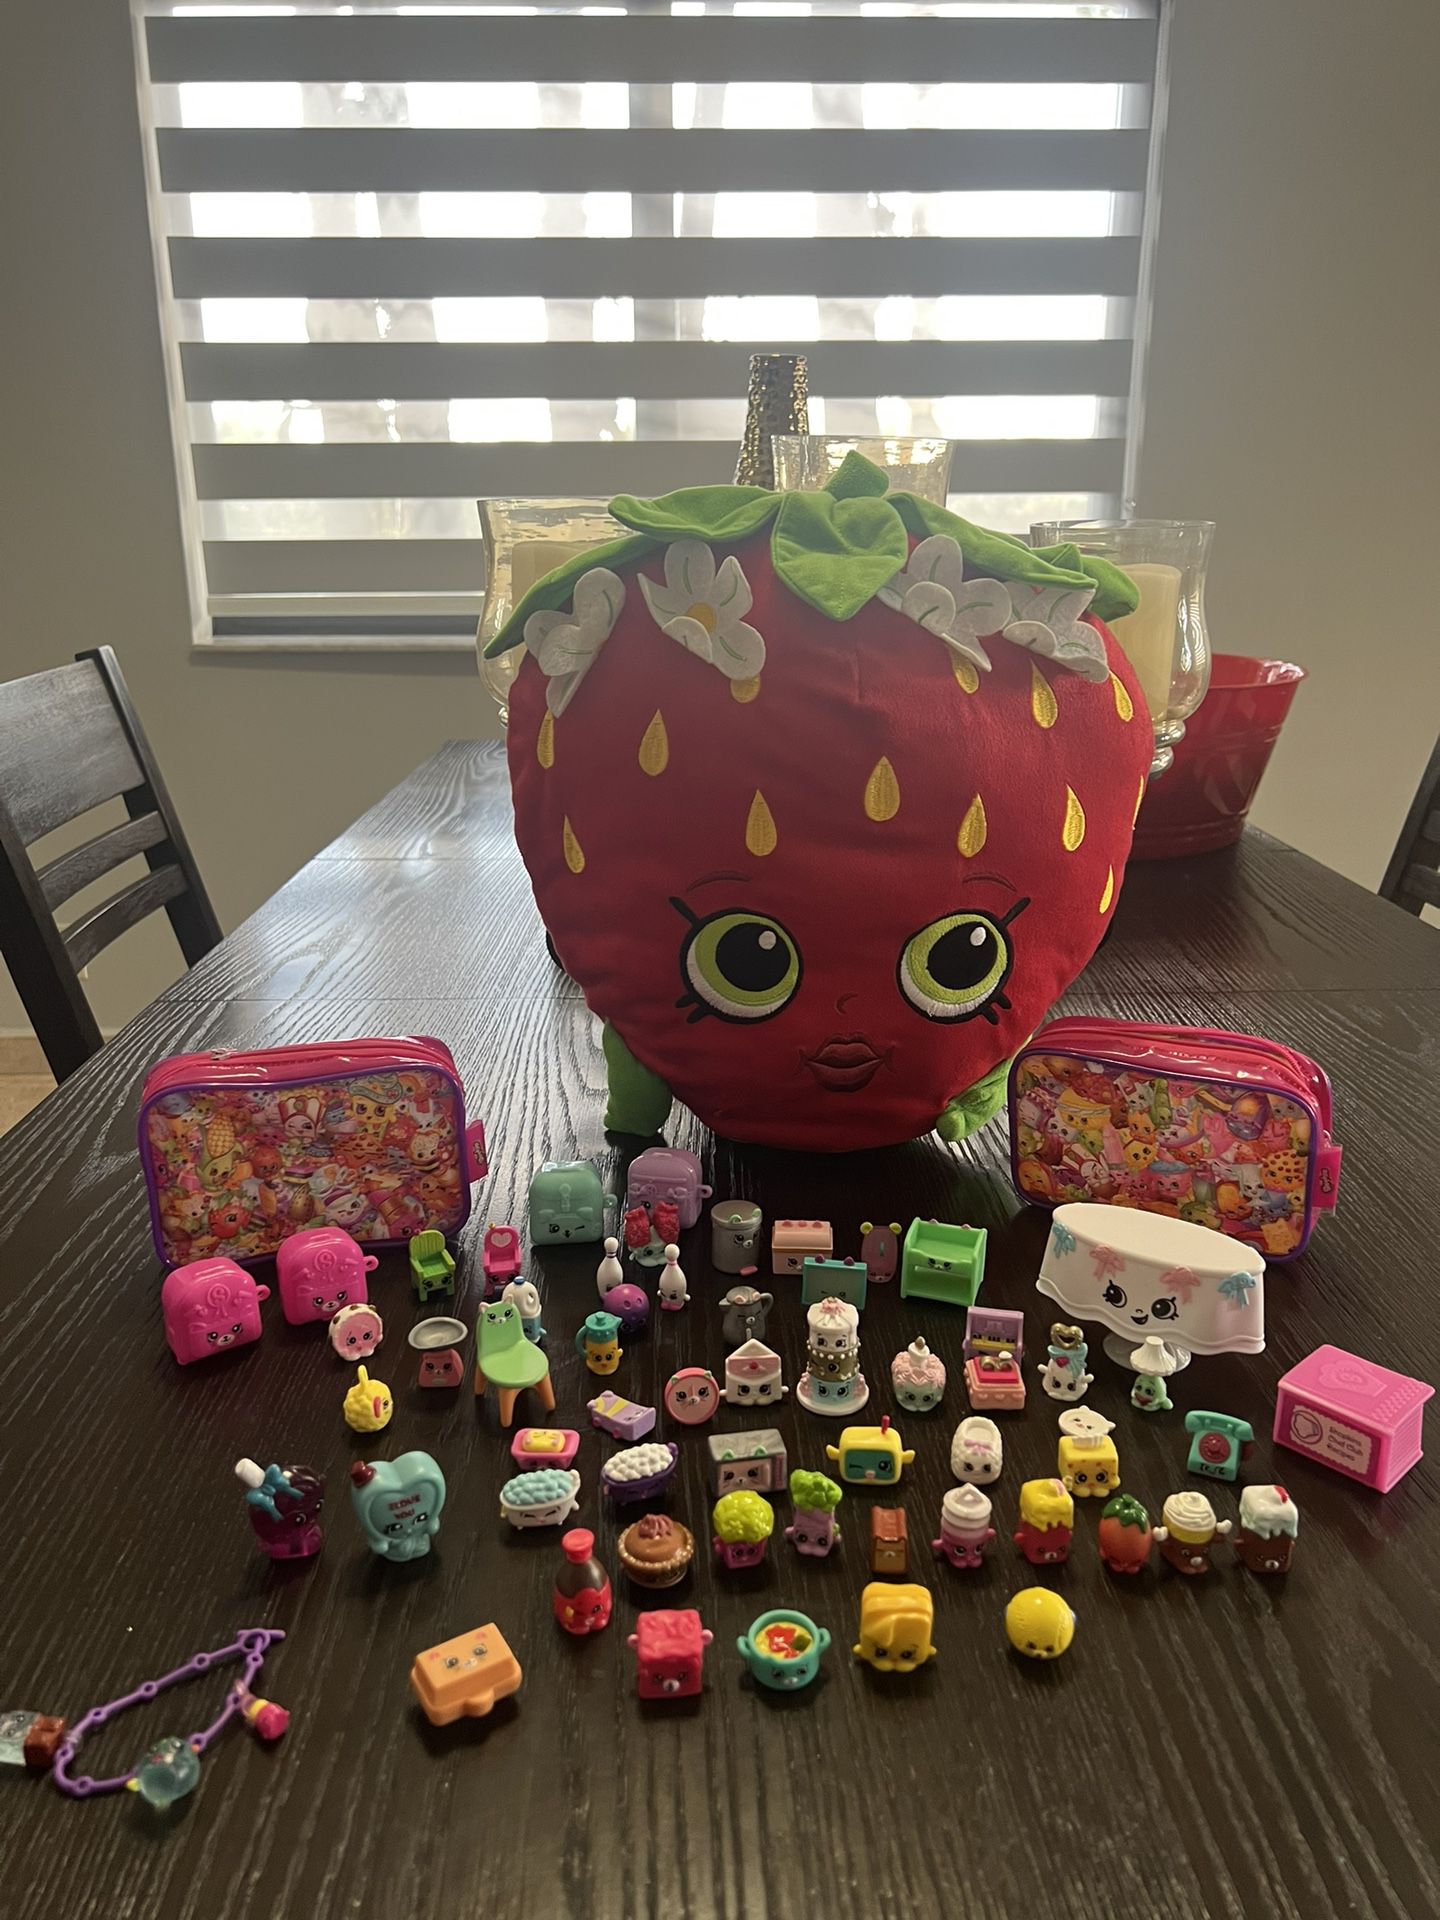 Shopkins Collection 